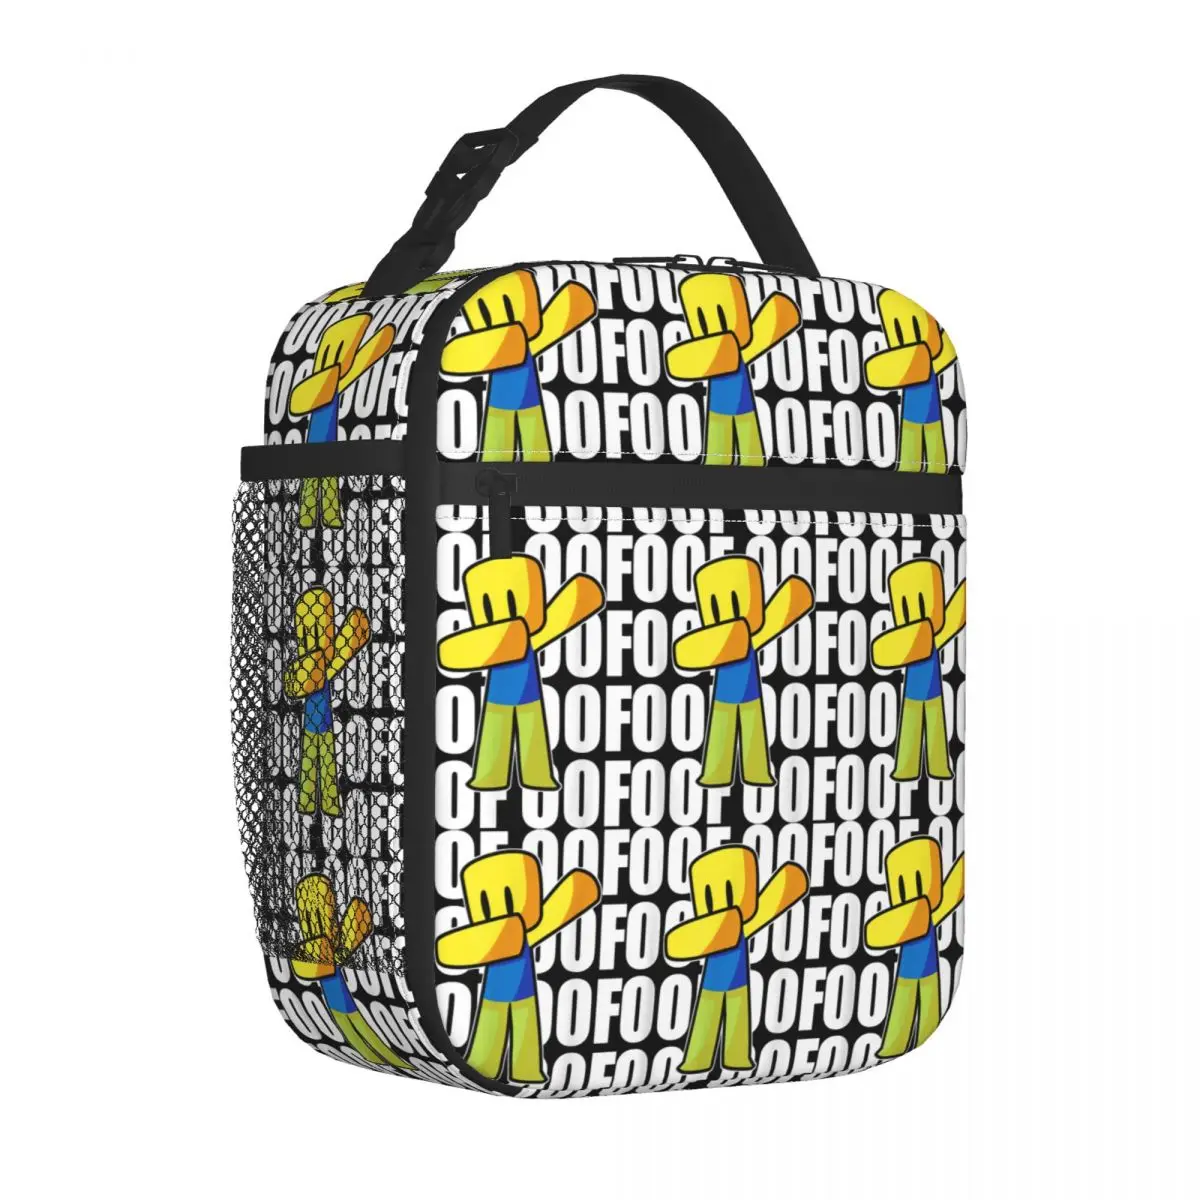 OOF Meme Dabbing Dab Noob Minifigure Insulated Lunch Bag Cooler Bag Meal Container Large Lunch Box Tote Office Travel